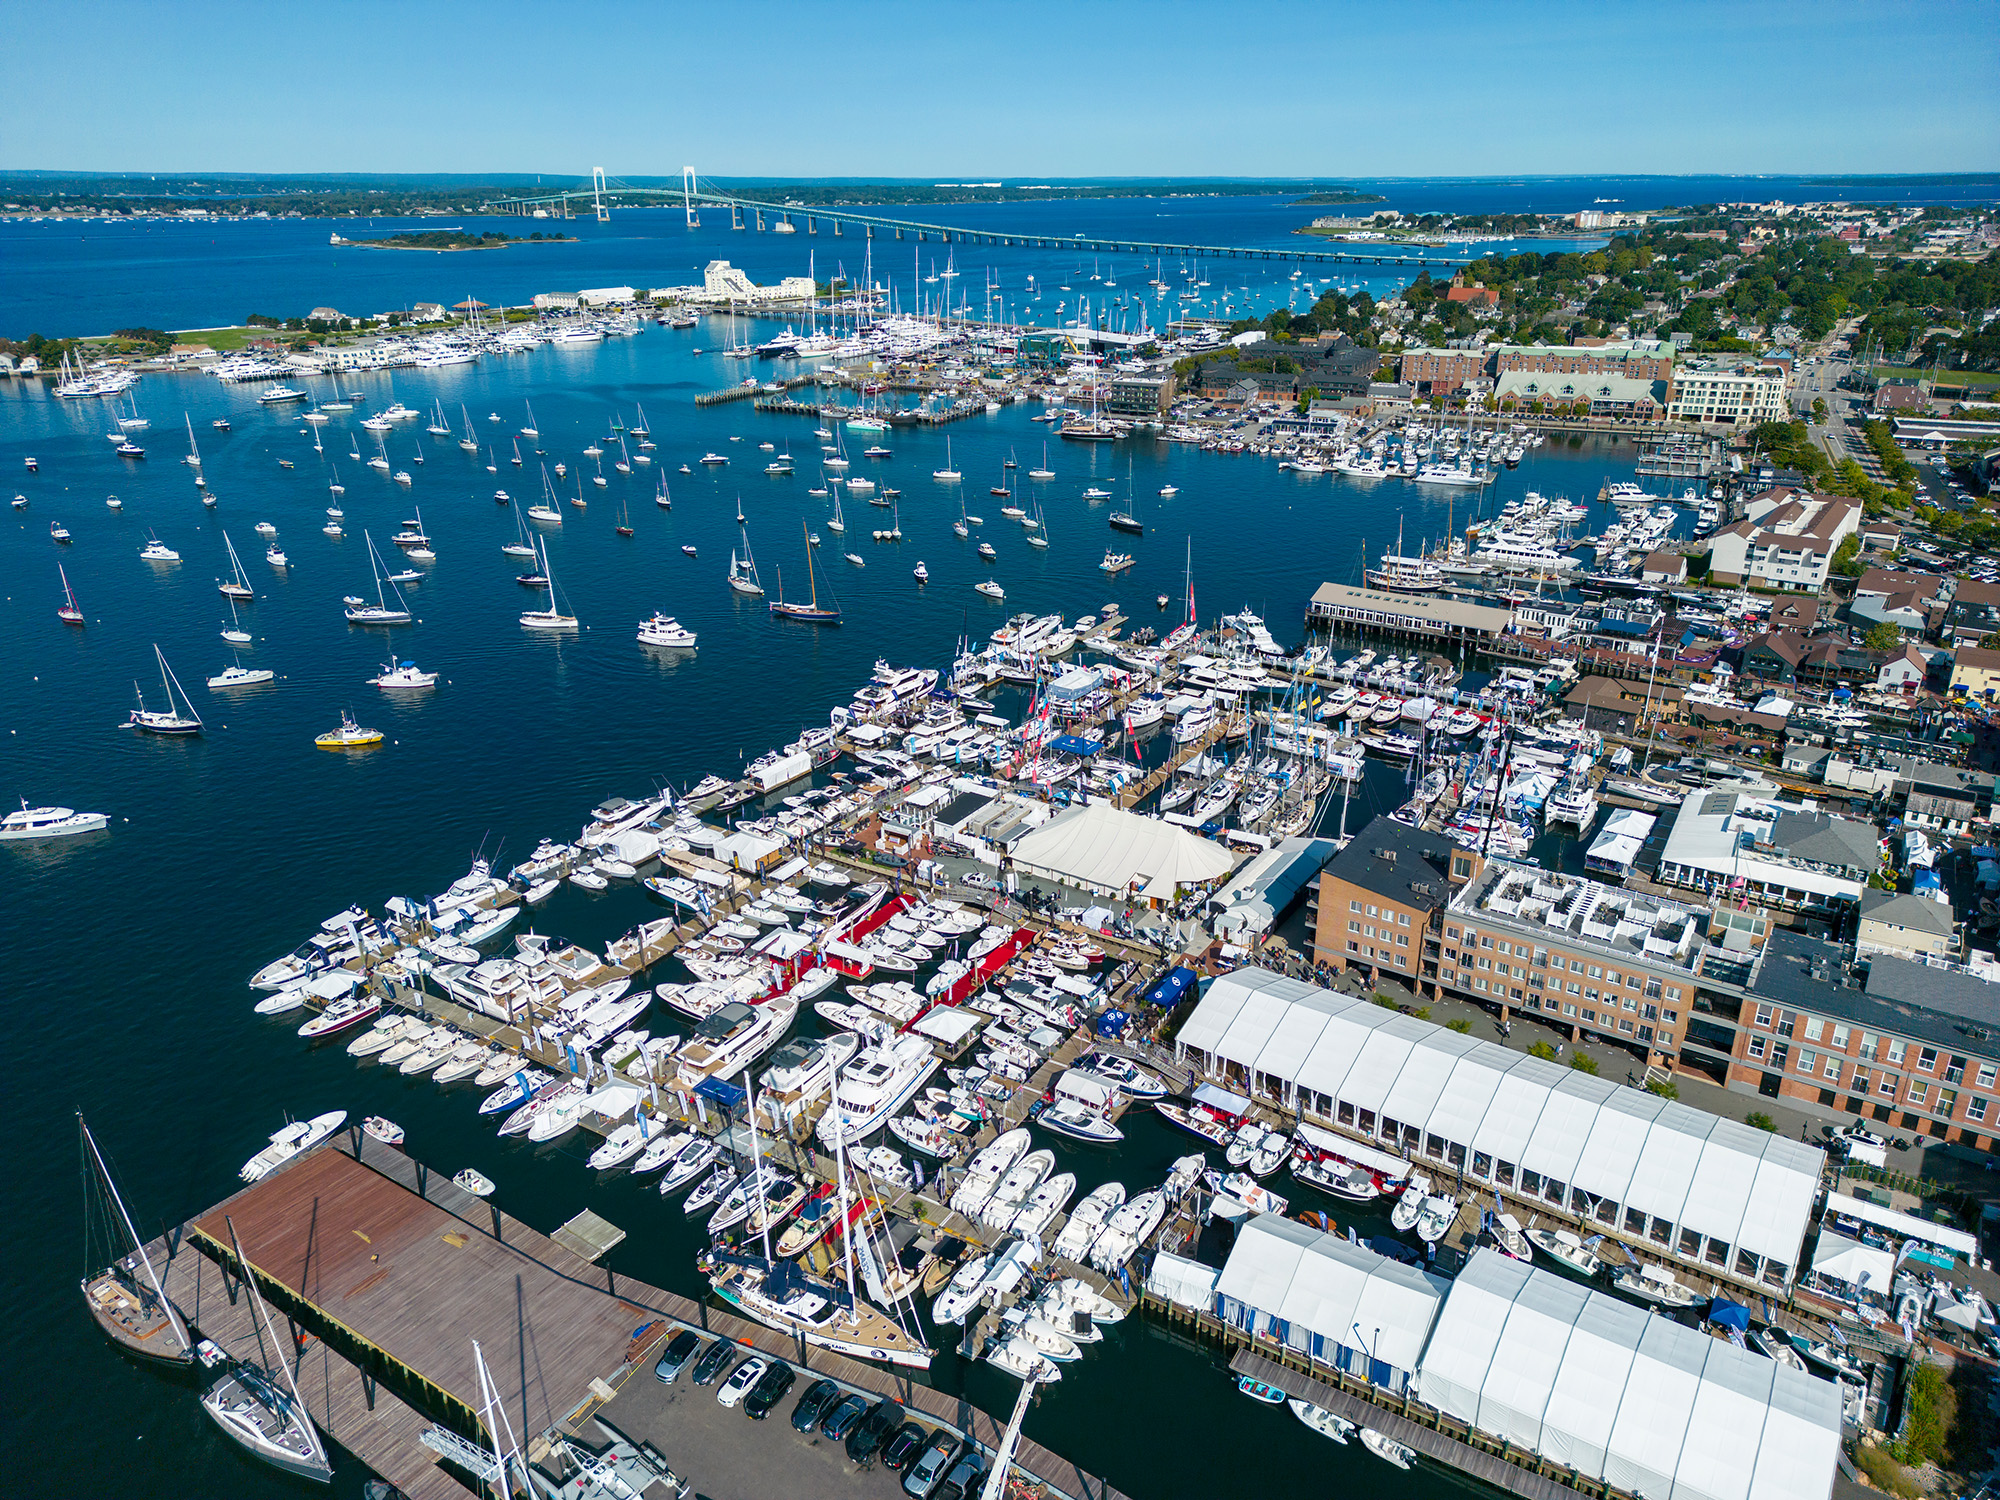 The Newport International Boat Show (NIBS) has been acquired from the Newport Restaurant Group by Informa Markets’ South Florida Ventures.